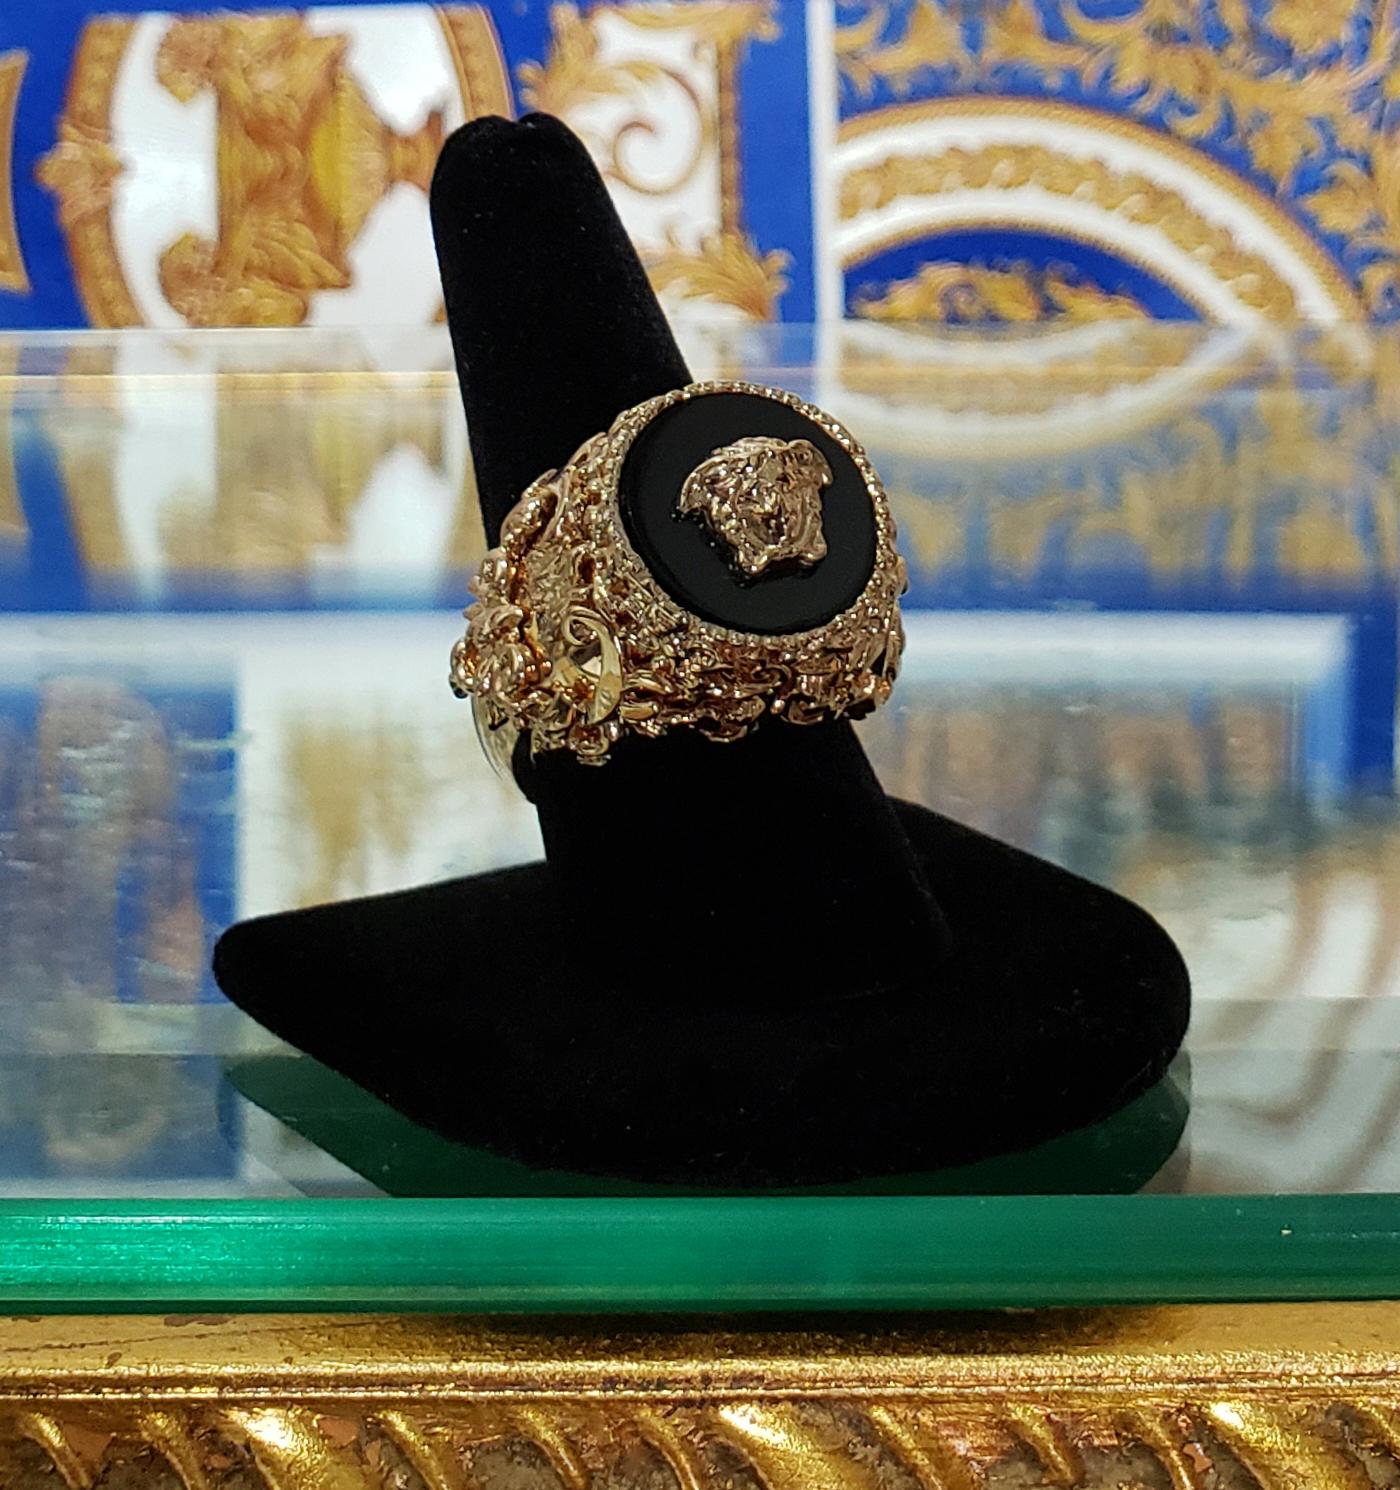 VERSACE

24K Gold Plated Medusa Ring

Black insert

Baroque pattern

Made in Italy

Brand new. Display model, got minor scratches.

100% authentic guarantee. Comes with Versace box.

 PLEASE VISIT OUR STORE FOR MORE GREAT ITEMS